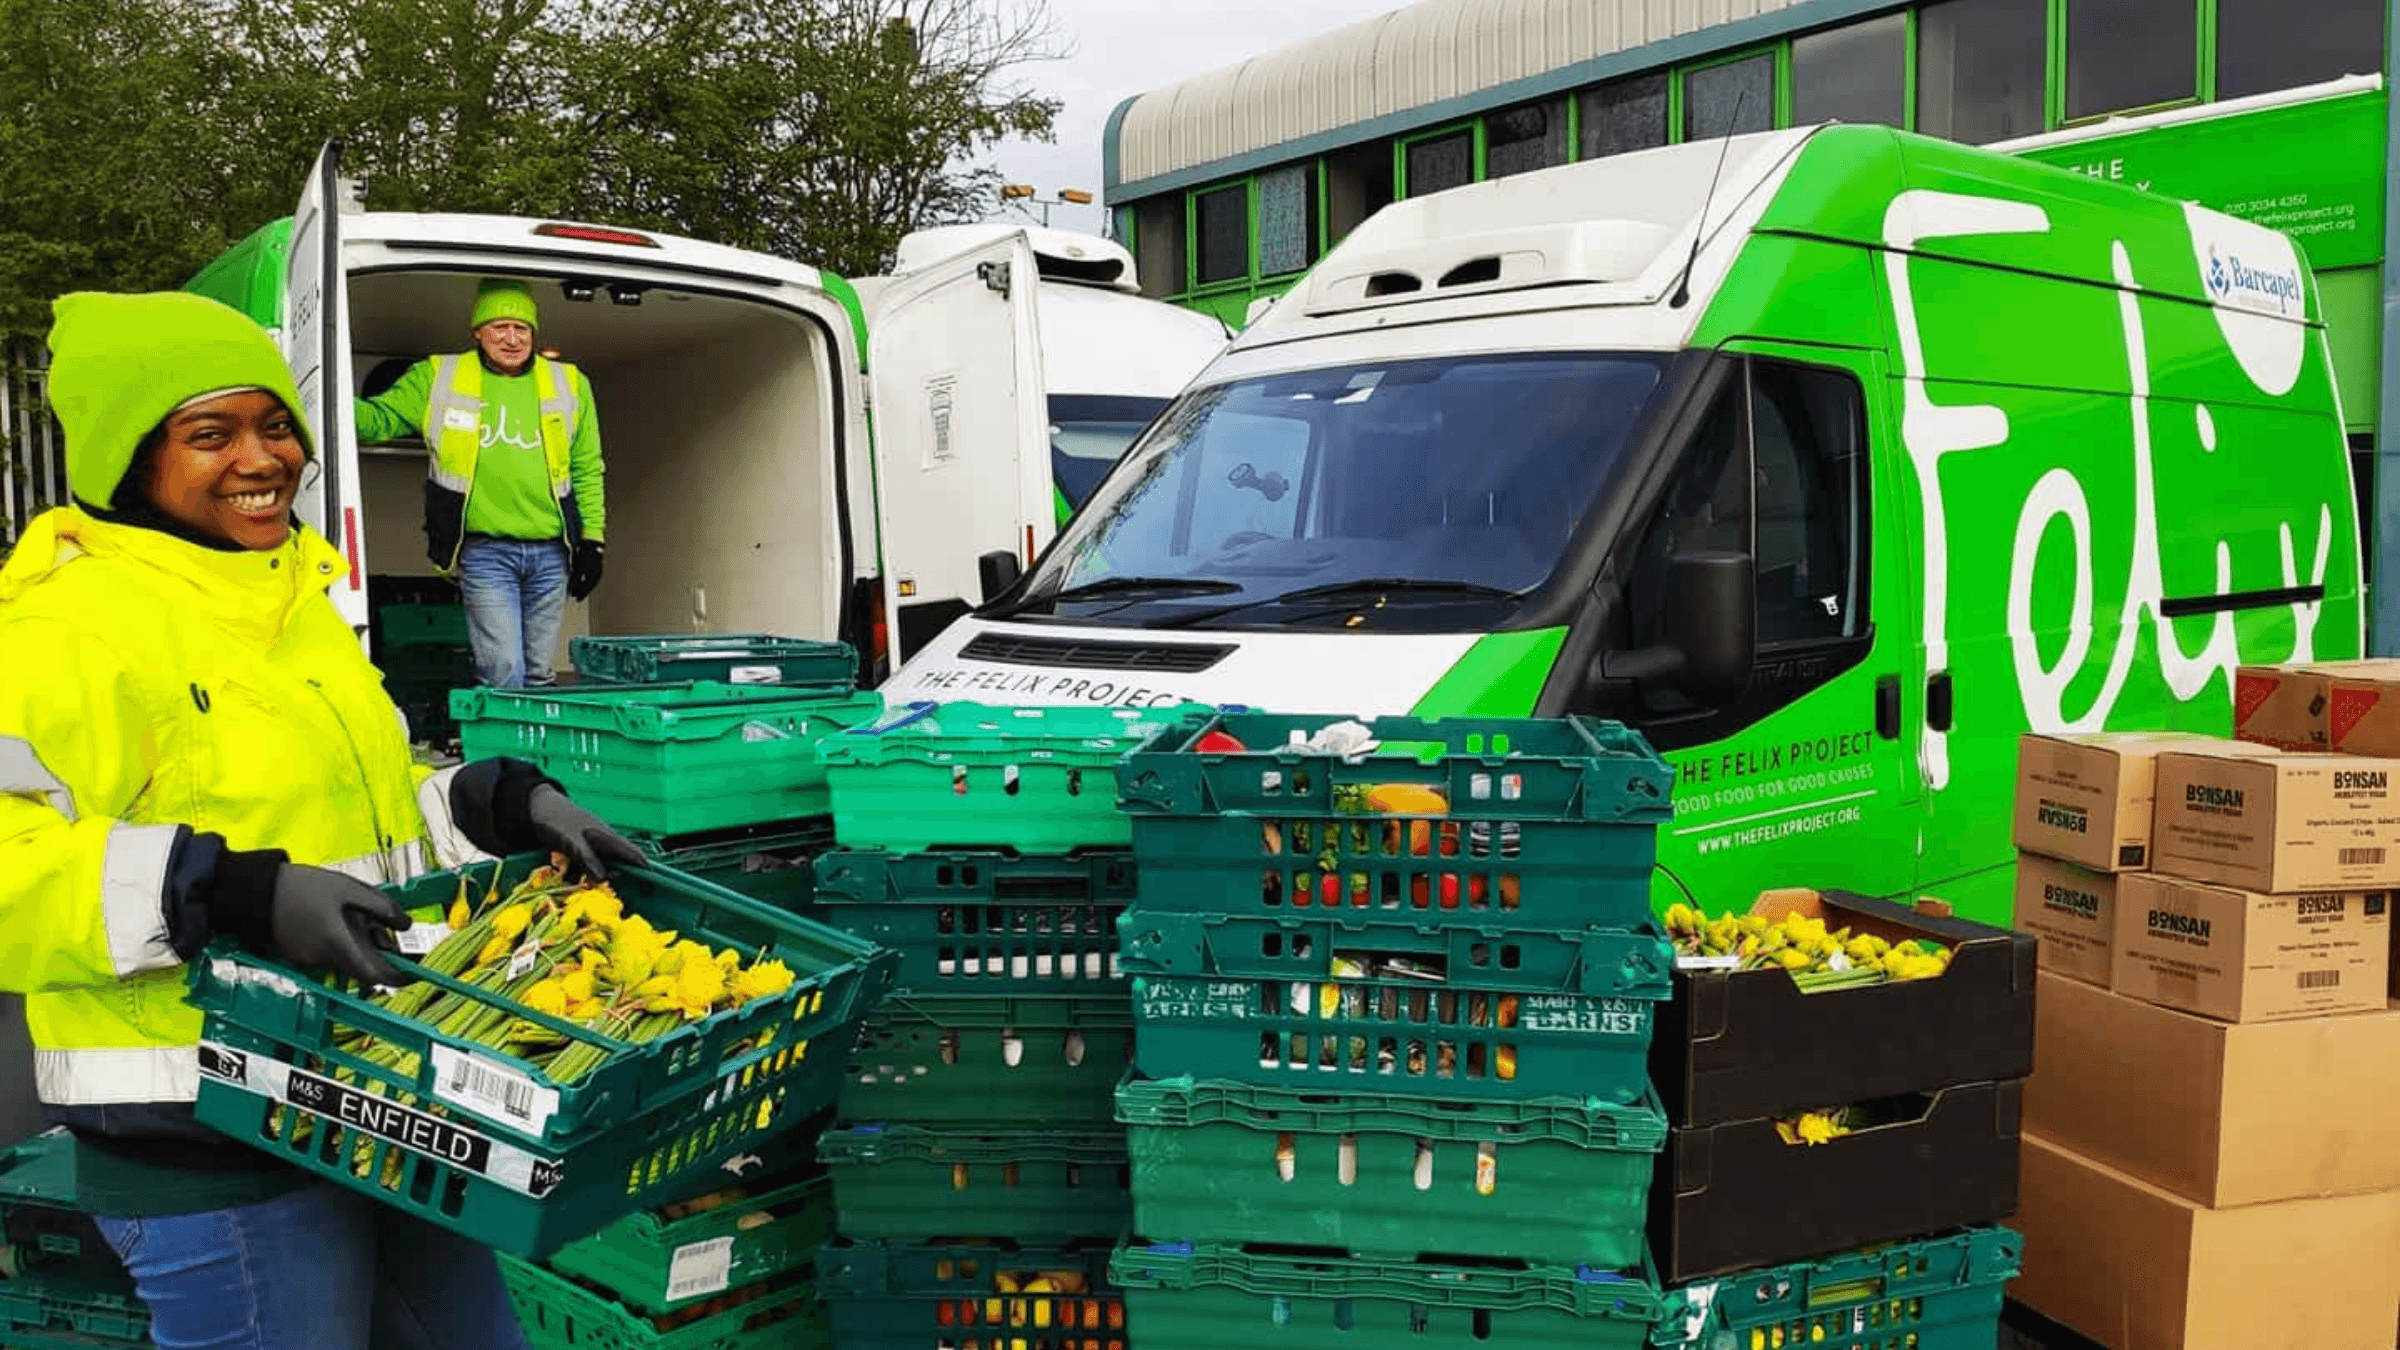 On the front line: our sector’s food charities fighting poverty and tackling food waste